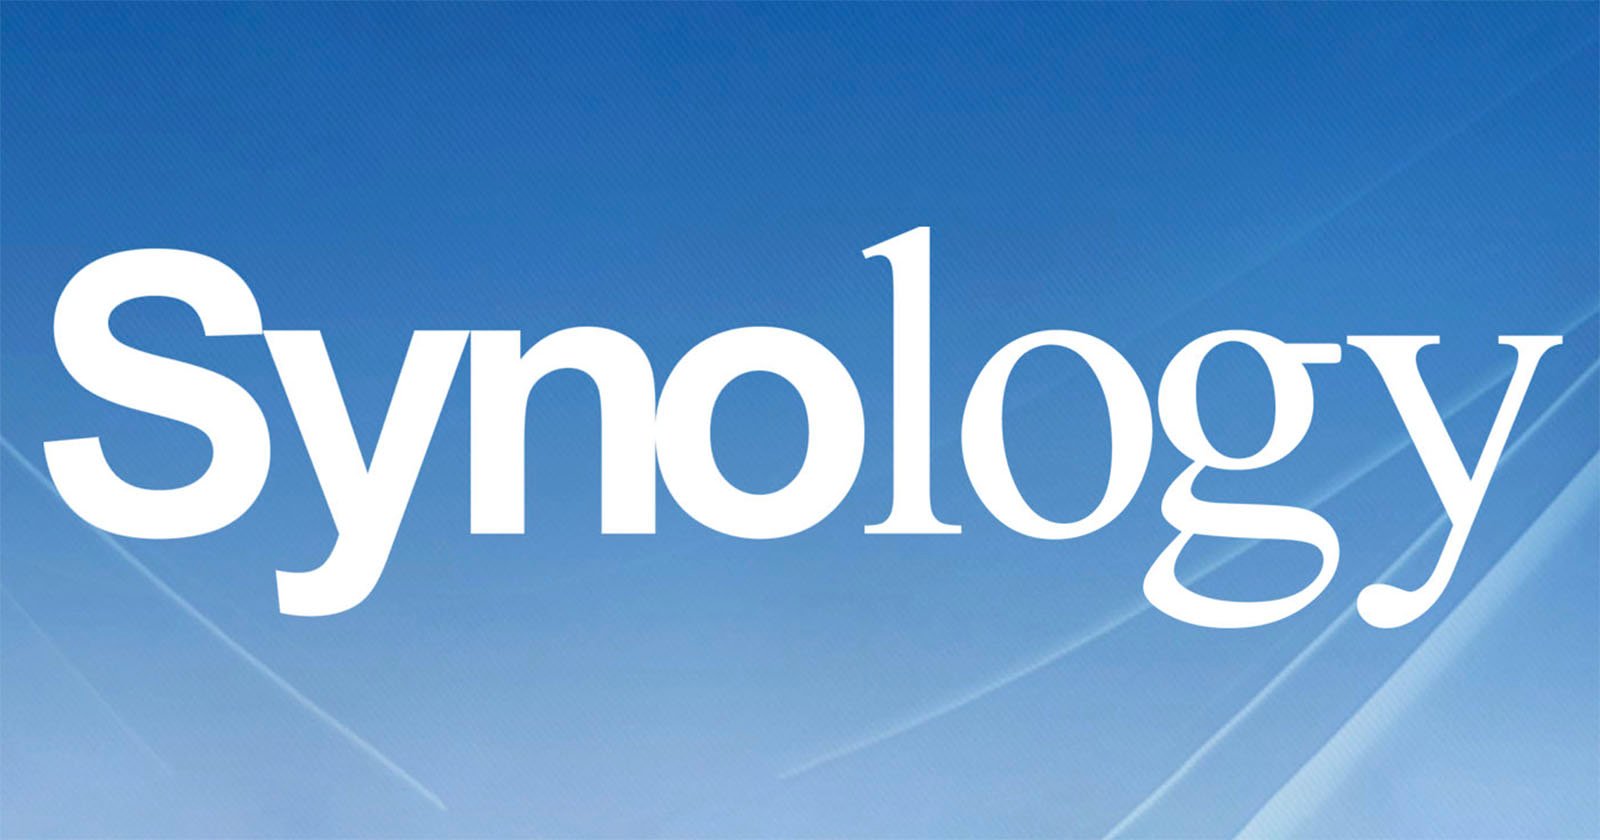 Synology logo on a gradient blue background